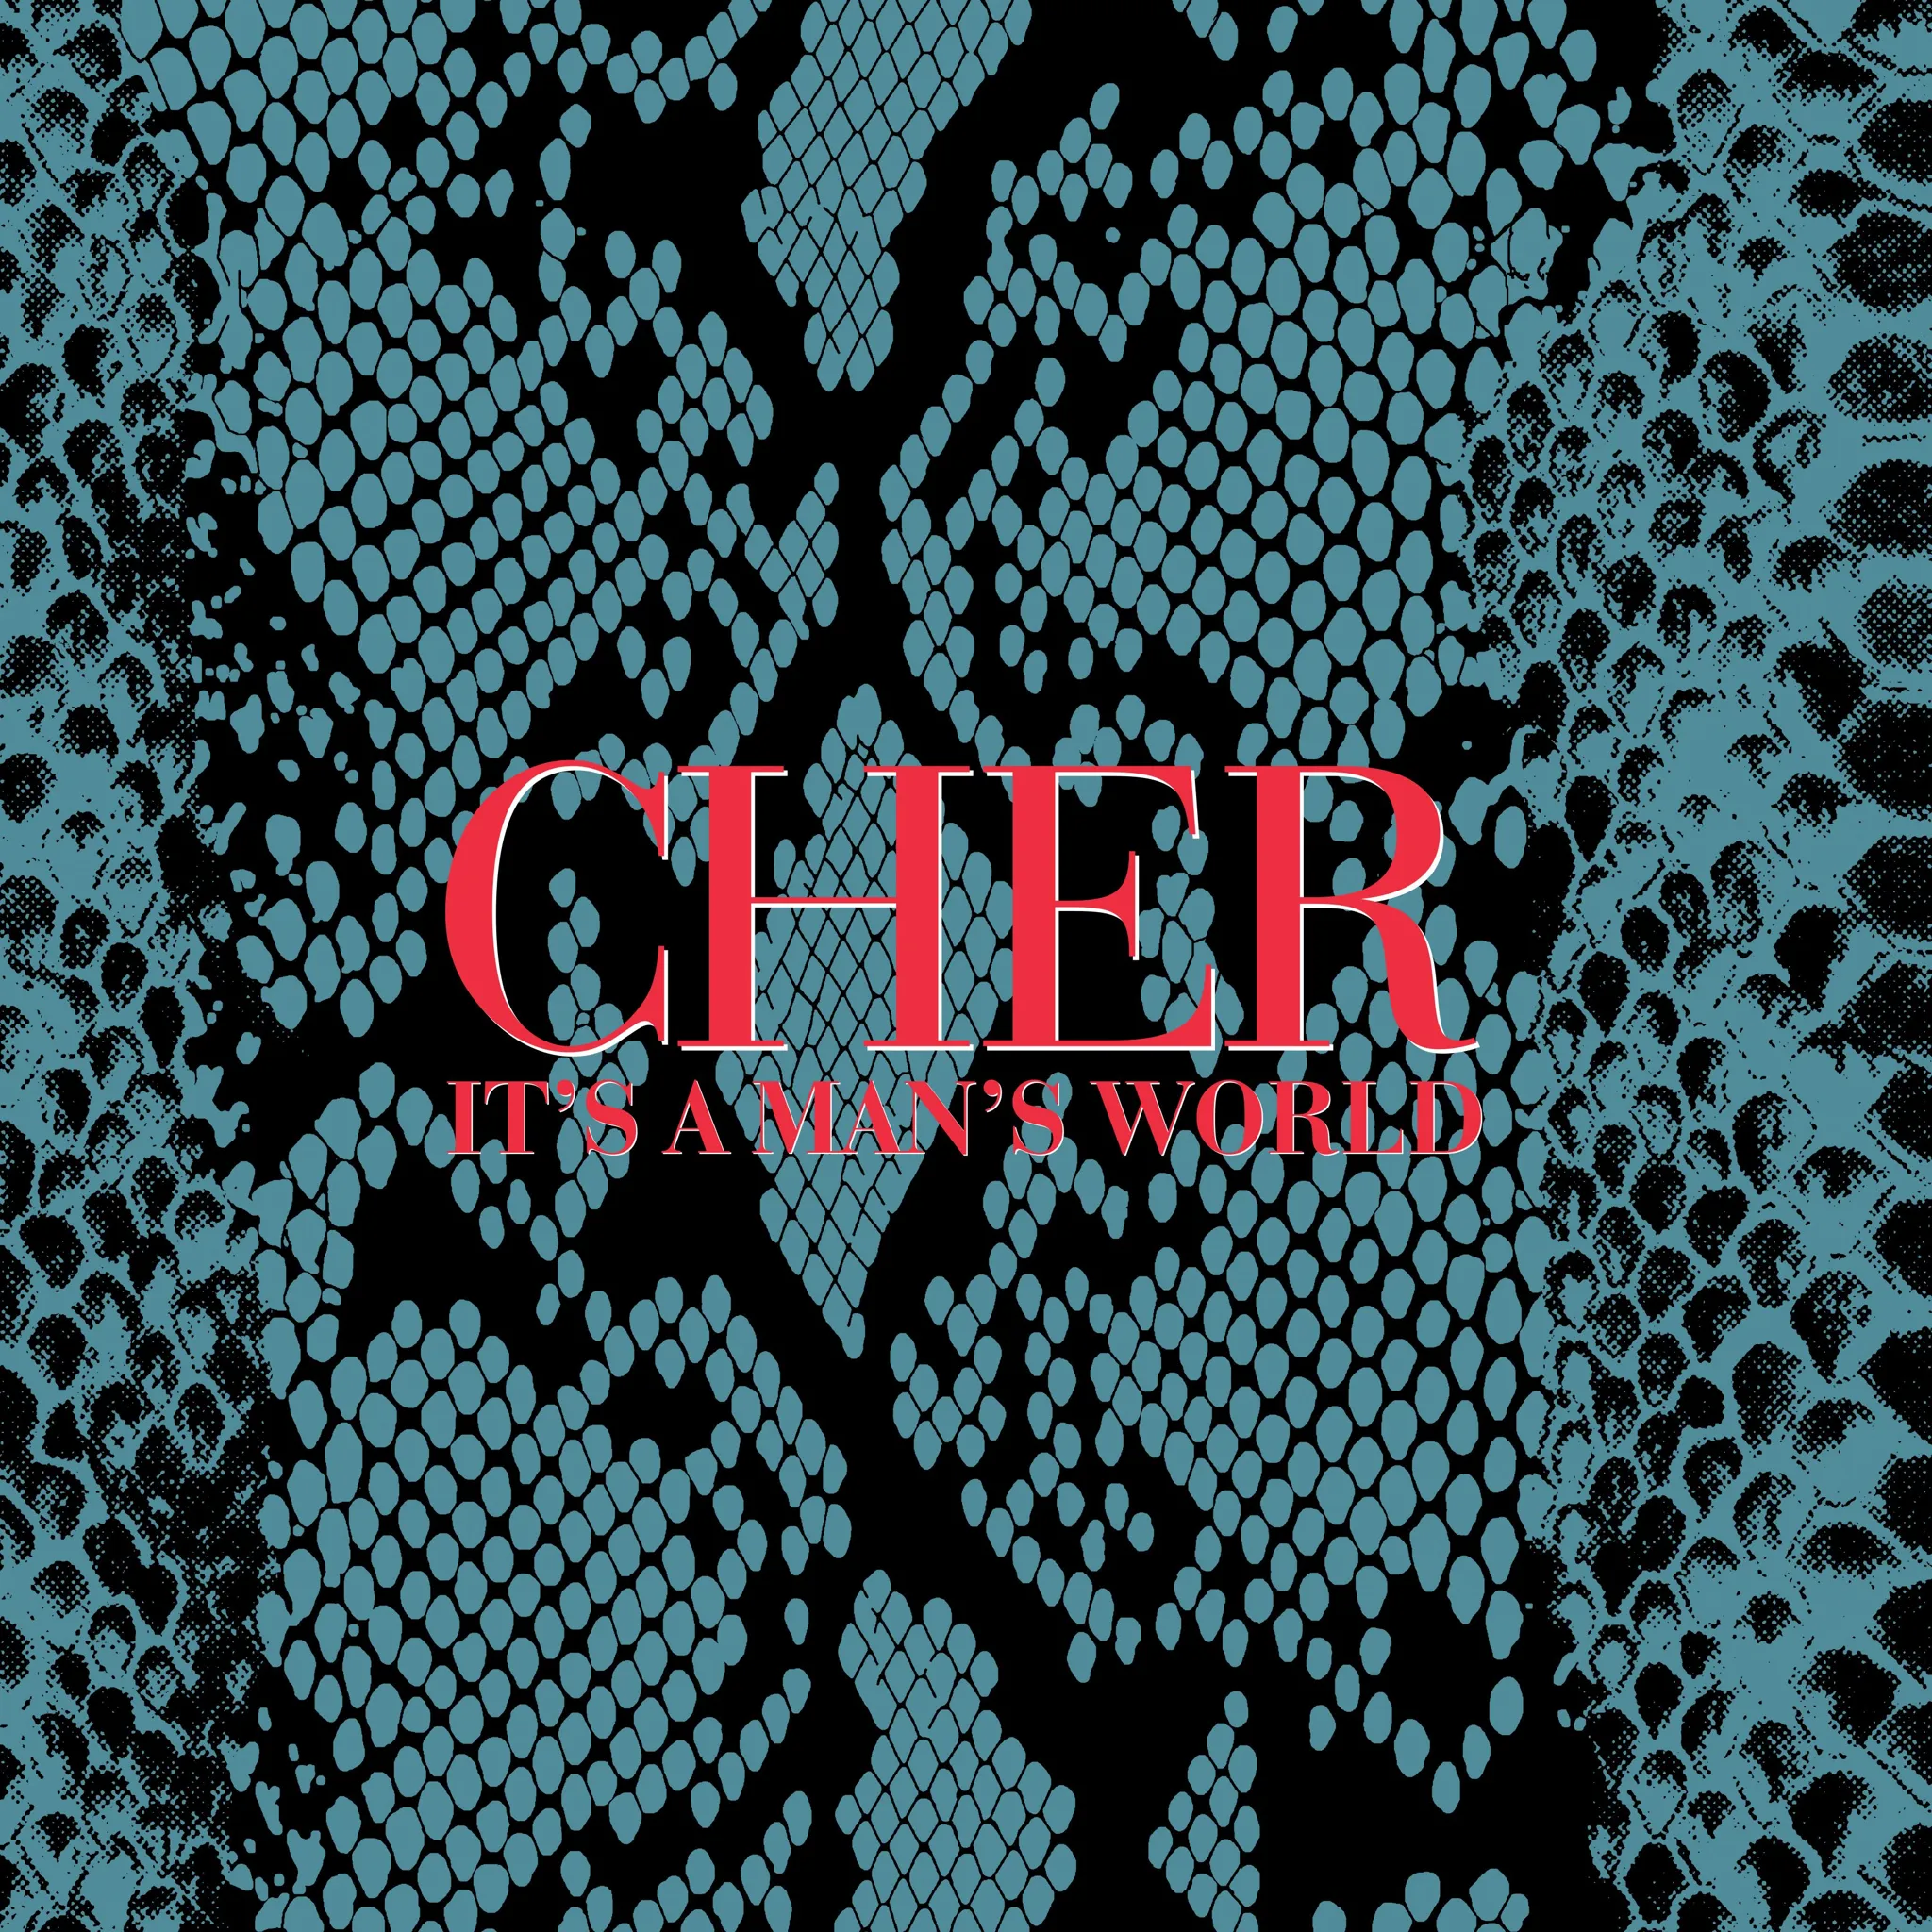 Cher - It’s a Man’s World (Deluxe Edition) artwork